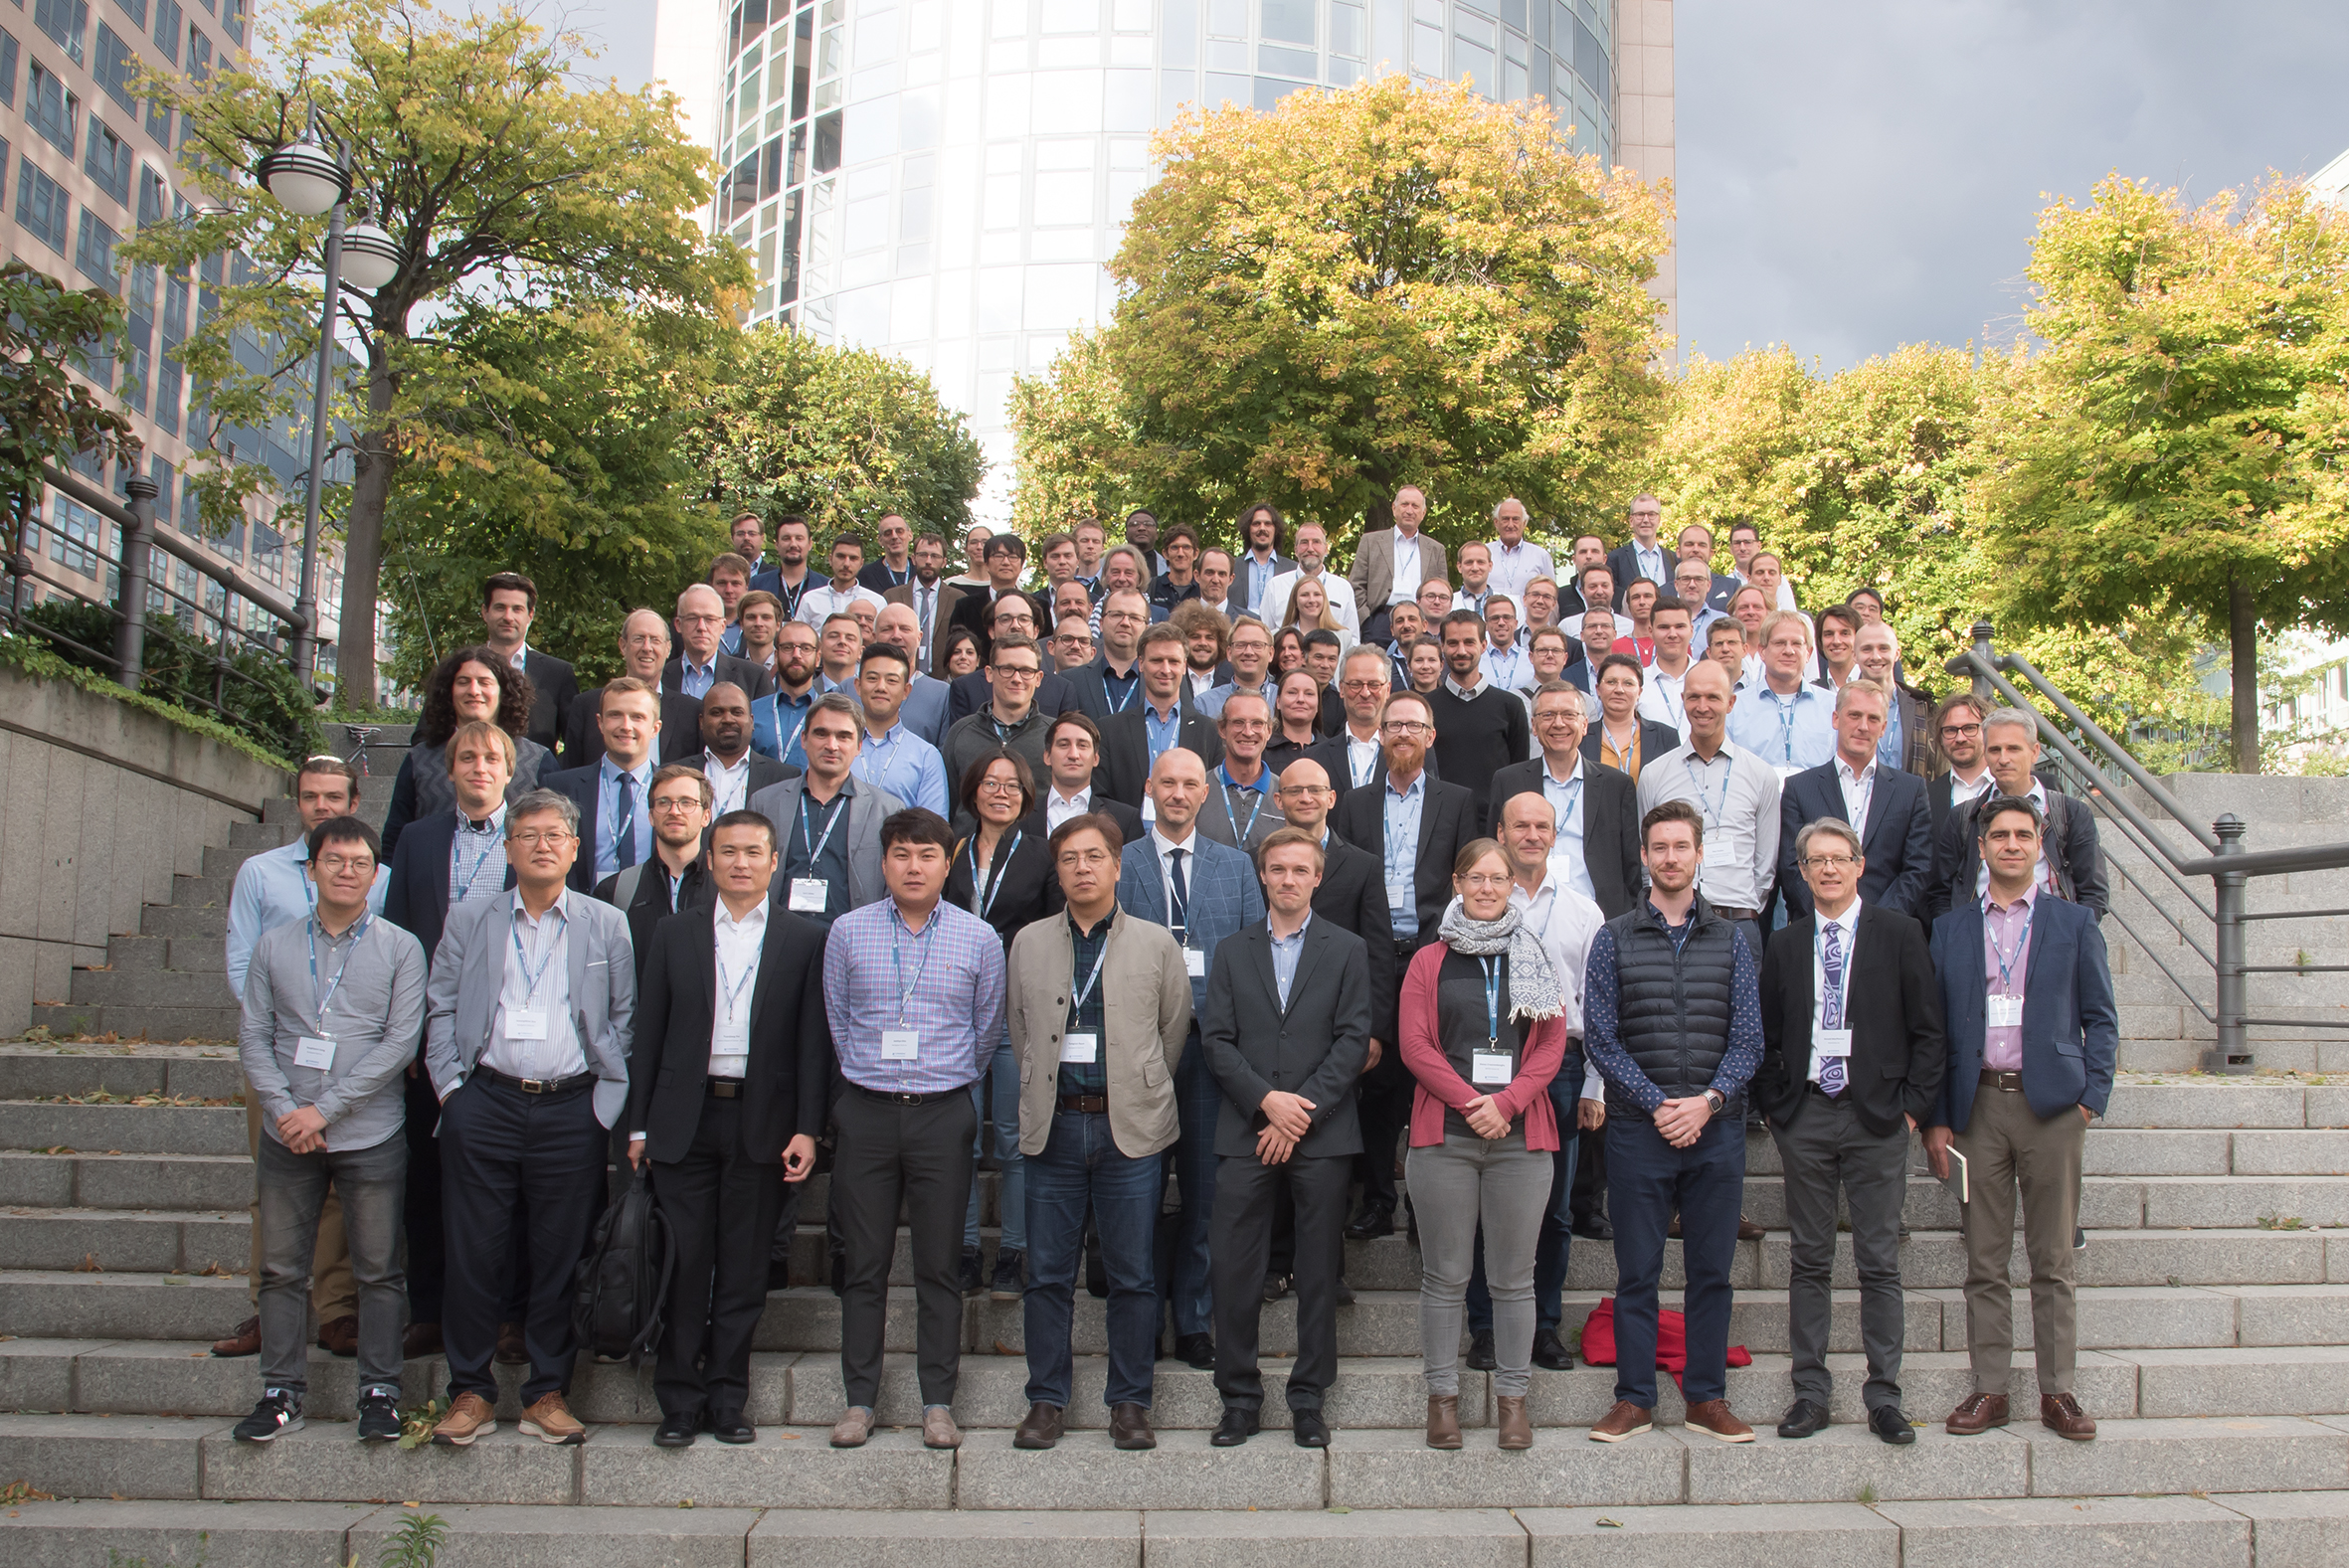 CAESES User Conference 2019 participants